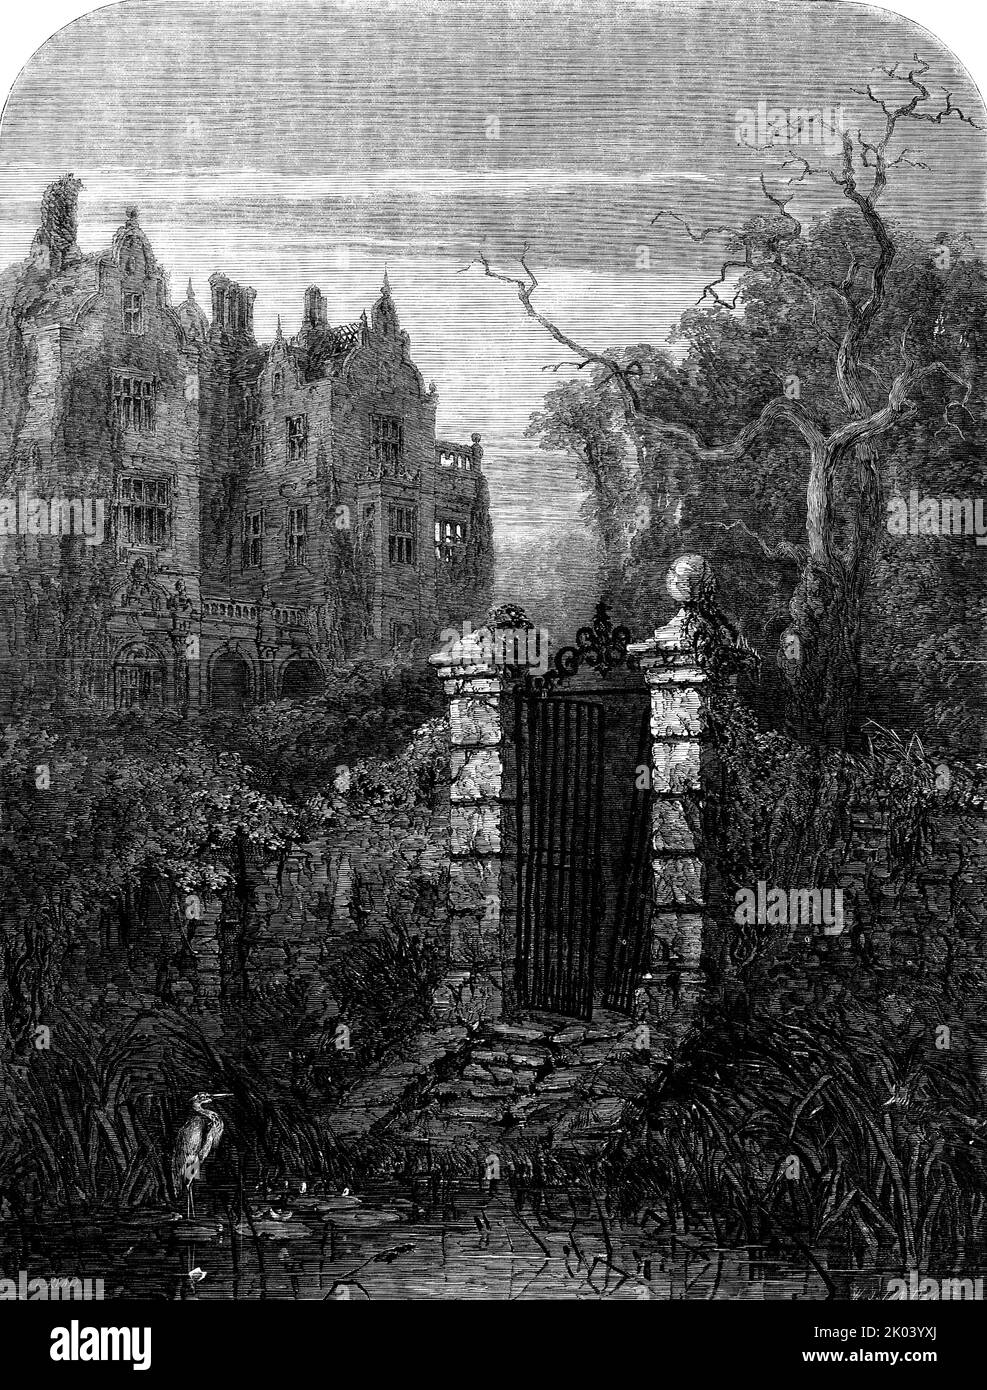 &quot;The Haunted House&quot; - drawn by S. Read, 1854. 'The subject of Mr. Read's picture is taken from the beautiful poem of &quot;The Haunted House&quot;, by the late Thomas Hood. The picture is worthy of the poem; which is the highest praise we can give it. &quot;Unhing'd the iron gates half open hung, Jarr'd by the gusty gales of many winters, That from its crumbled pedestal had flung One marble globe in splinters...The moping heron, motionless and stiff, That on a stone, as silently and stilly, Stood, an apparent sentinel, as if, To guard the water-lily...For over all there hung a cloud Stock Photo